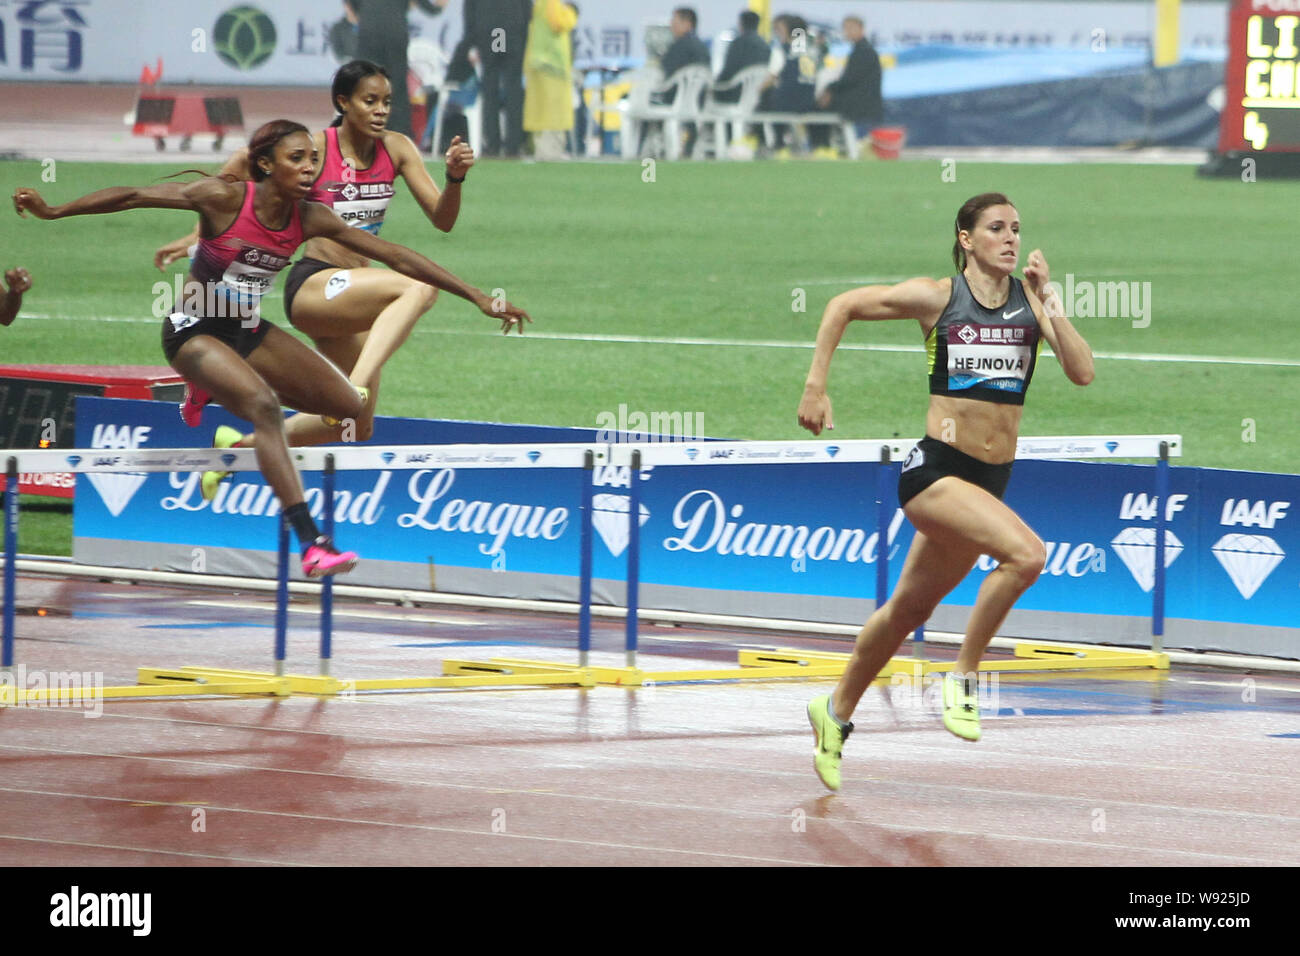 Zuzana Hejnova of The Czech Republic, right, and other athletes compete in the womens 400m hurdles event at the 2013 IAAF Diamond League in Shanghai, Stock Photo